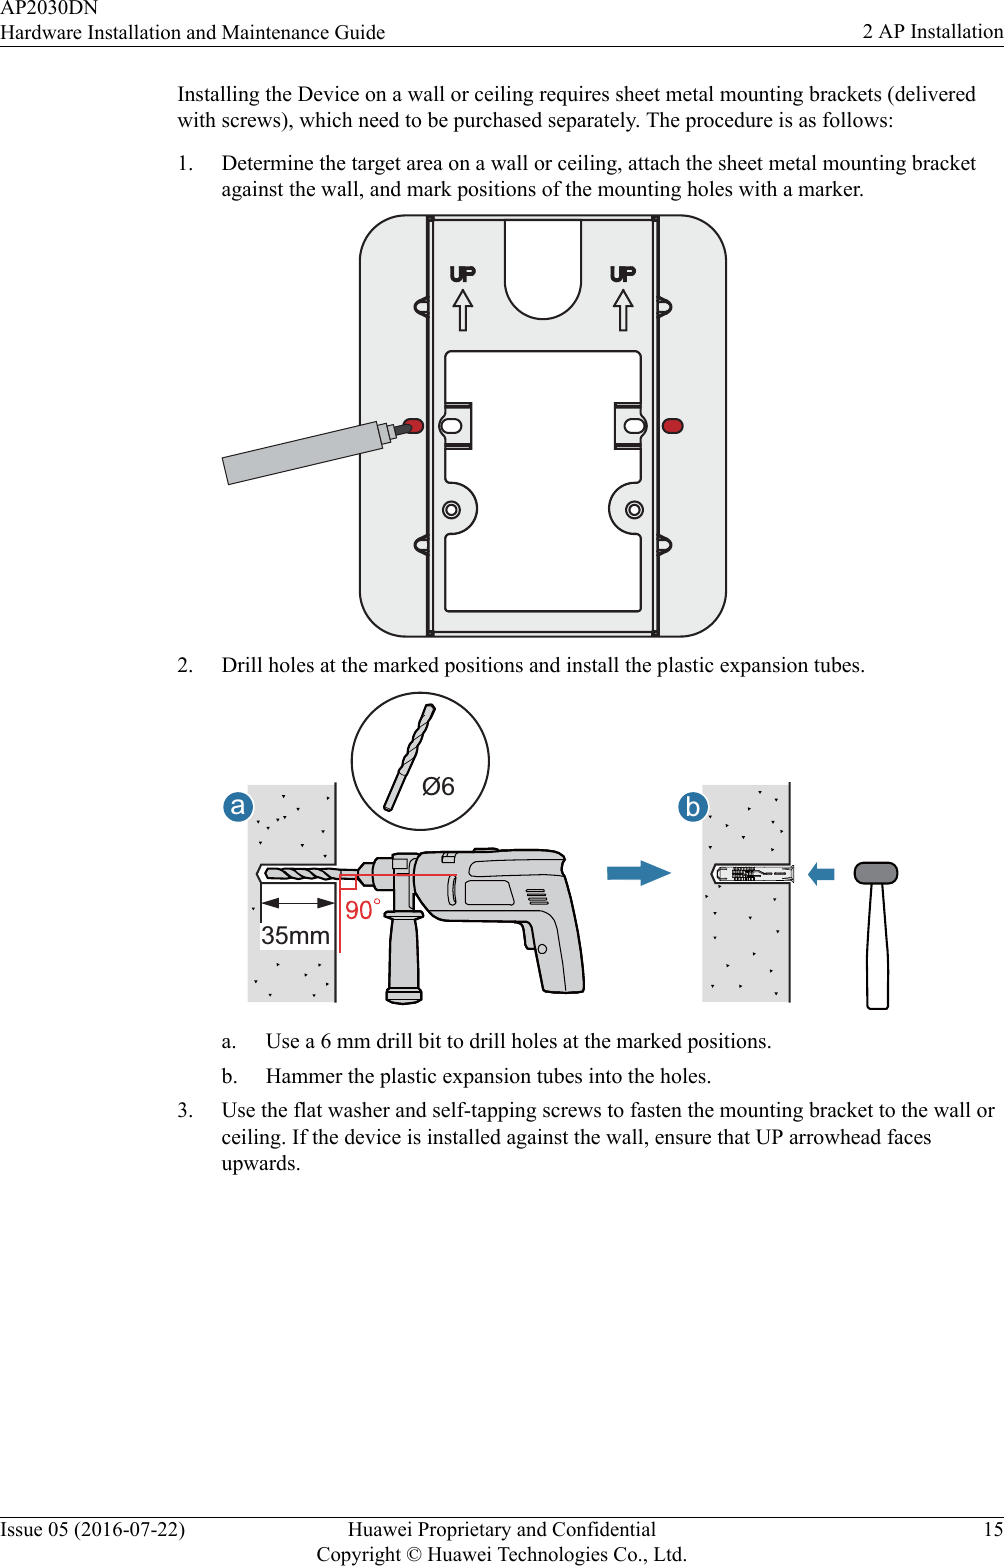 Installing the Device on a wall or ceiling requires sheet metal mounting brackets (deliveredwith screws), which need to be purchased separately. The procedure is as follows:1. Determine the target area on a wall or ceiling, attach the sheet metal mounting bracketagainst the wall, and mark positions of the mounting holes with a marker.2. Drill holes at the marked positions and install the plastic expansion tubes.abØ635mma. Use a 6 mm drill bit to drill holes at the marked positions.b. Hammer the plastic expansion tubes into the holes.3. Use the flat washer and self-tapping screws to fasten the mounting bracket to the wall orceiling. If the device is installed against the wall, ensure that UP arrowhead facesupwards.AP2030DNHardware Installation and Maintenance Guide 2 AP InstallationIssue 05 (2016-07-22) Huawei Proprietary and ConfidentialCopyright © Huawei Technologies Co., Ltd.15